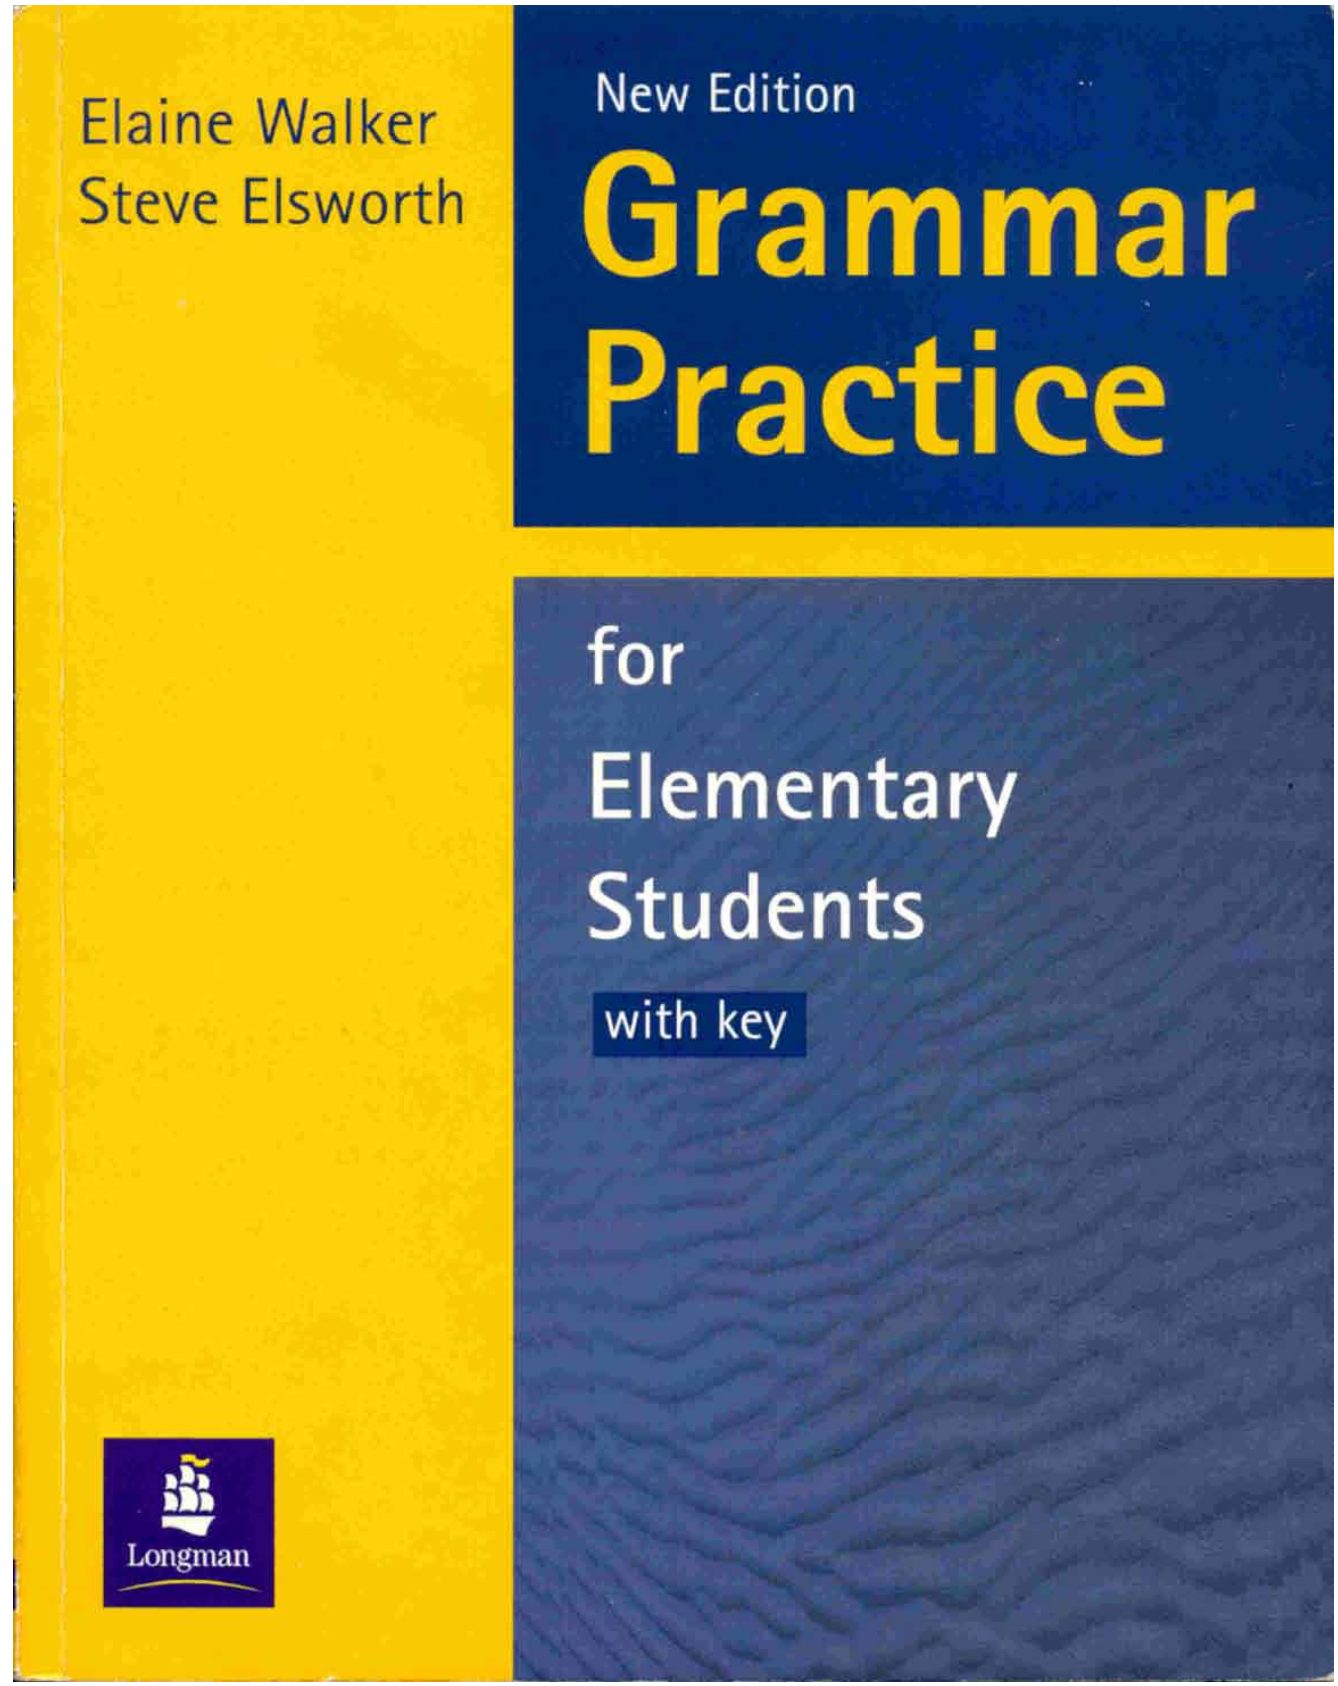 grammar-practice-for-elementary-students-book-pdf-books-library